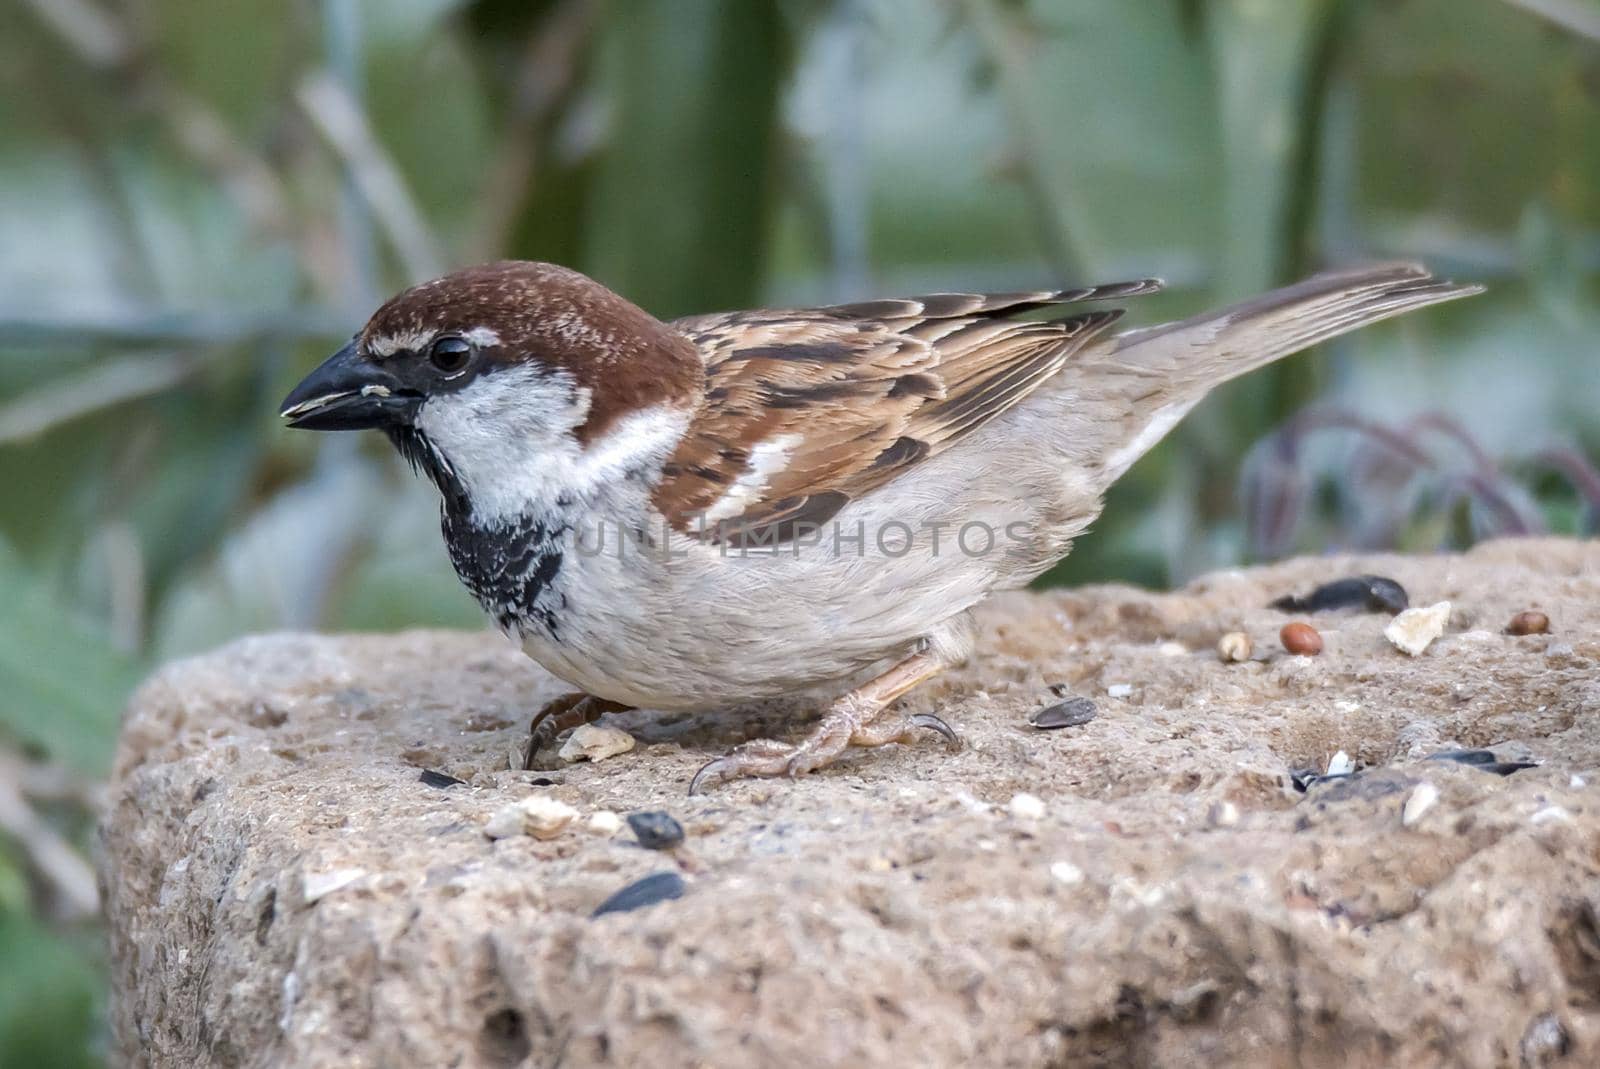 Sparrow resting on a log to eat by carfedeph